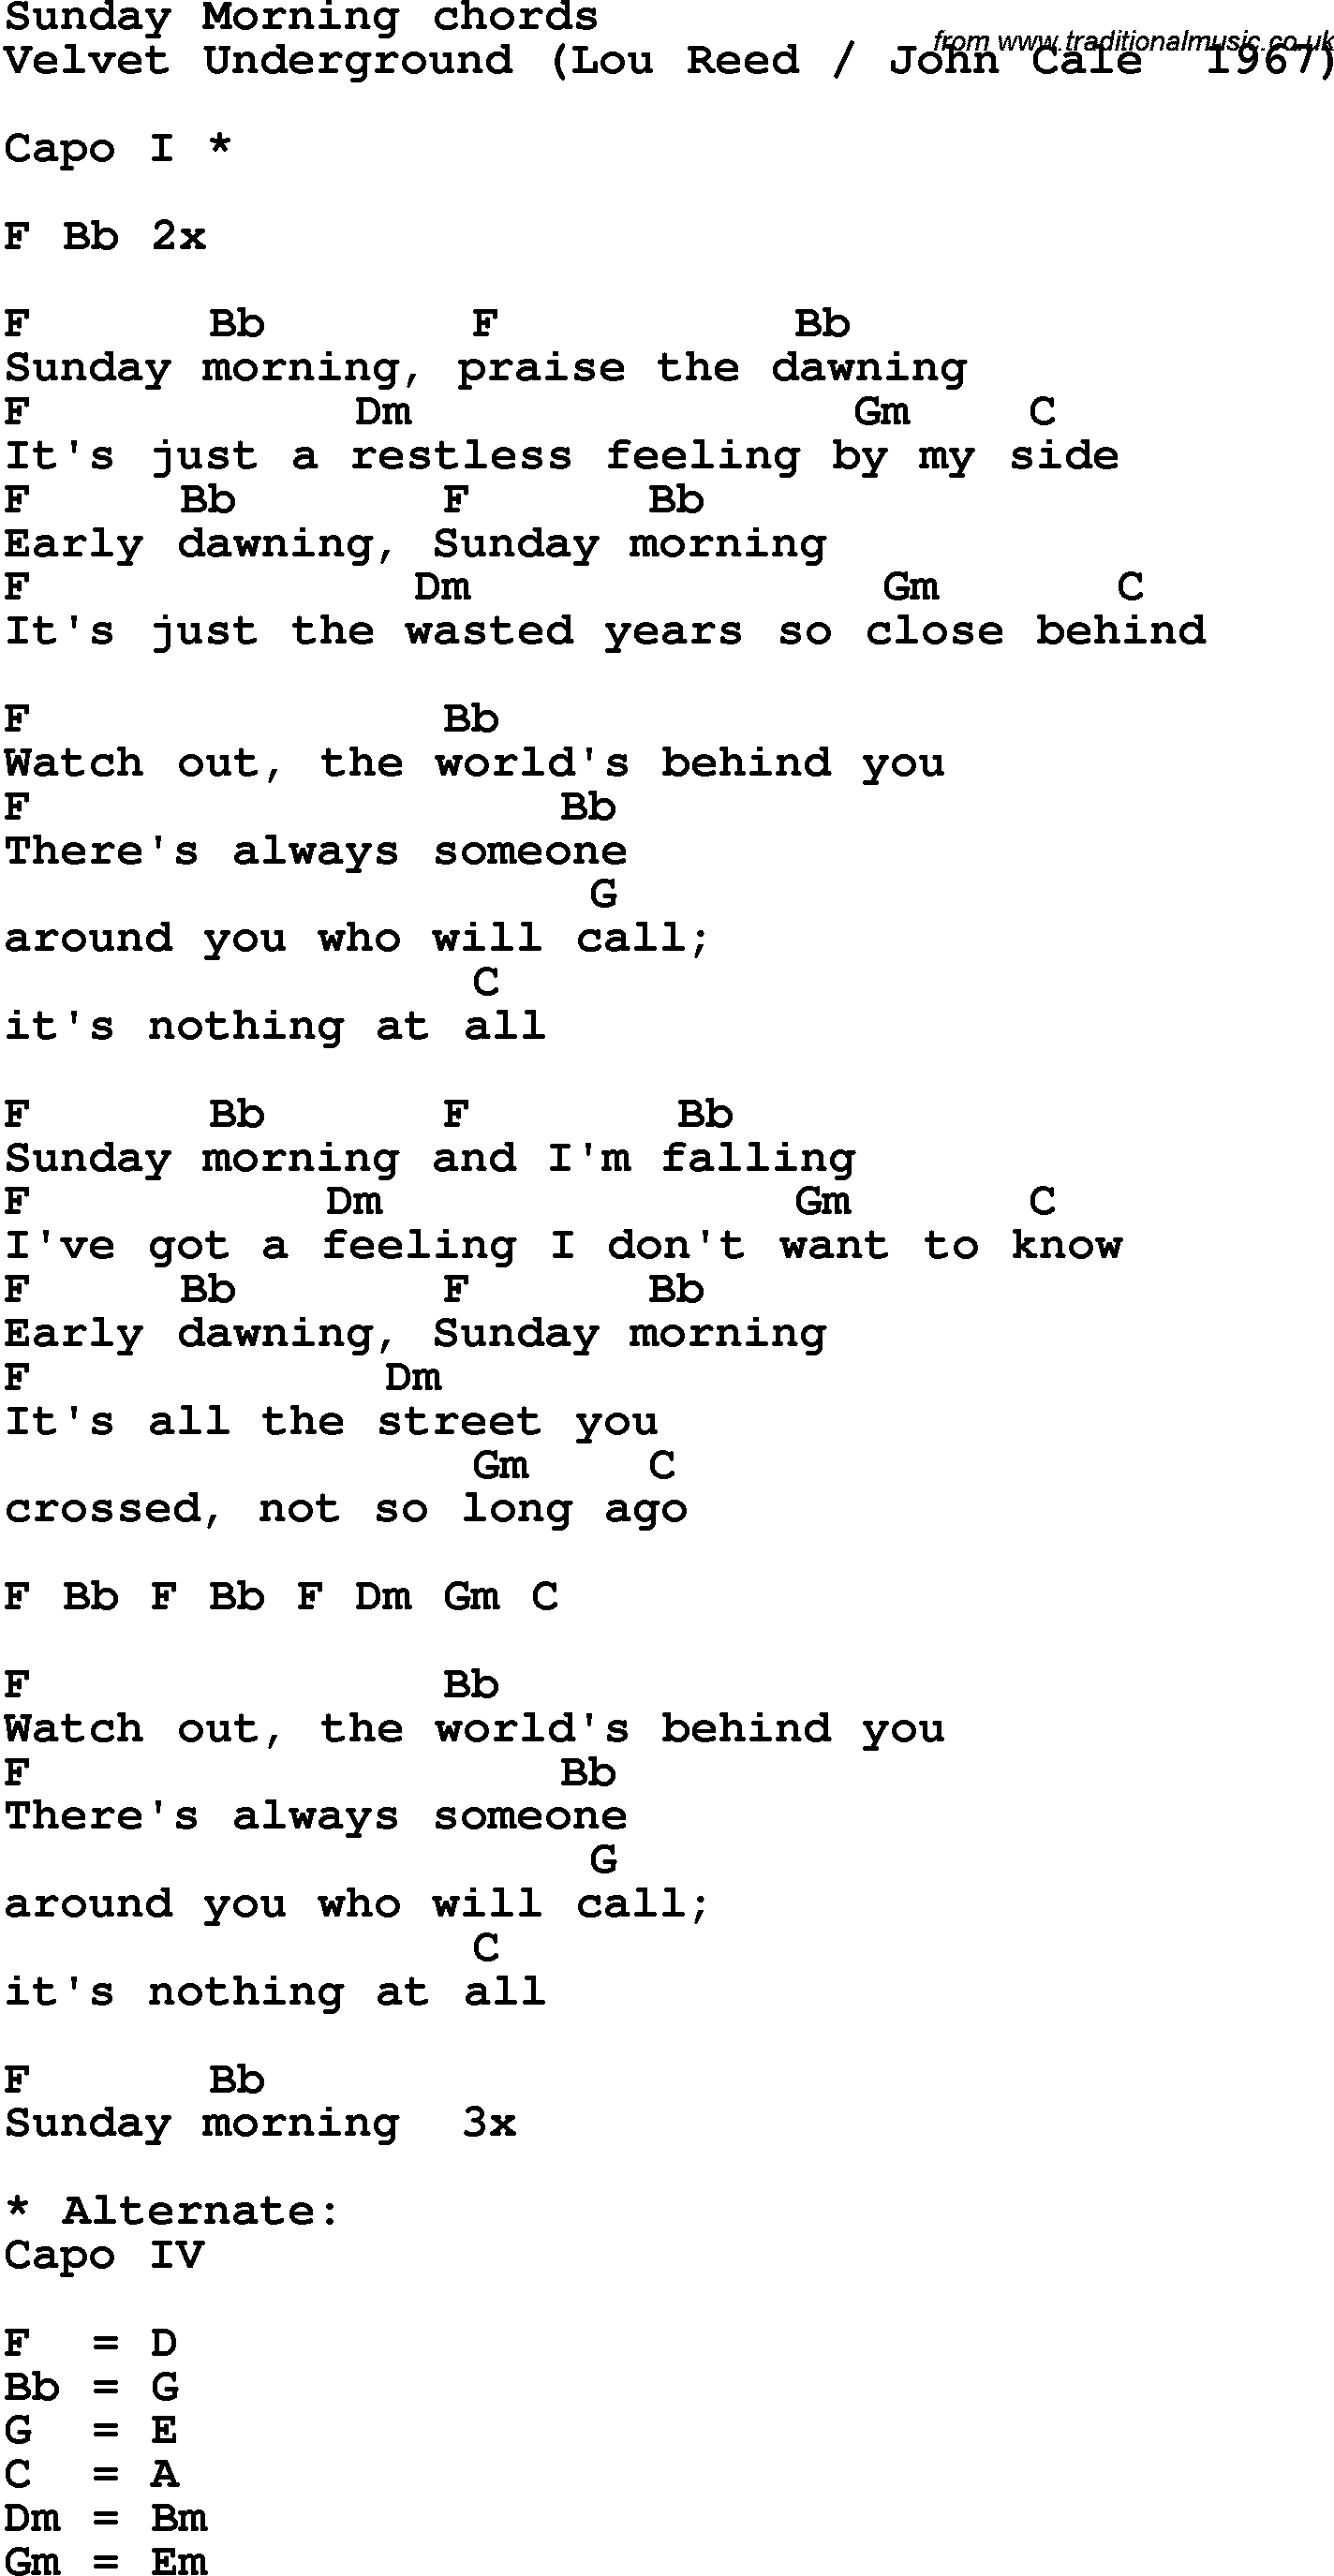 Song Lyrics with guitar chords for Sunday Morning